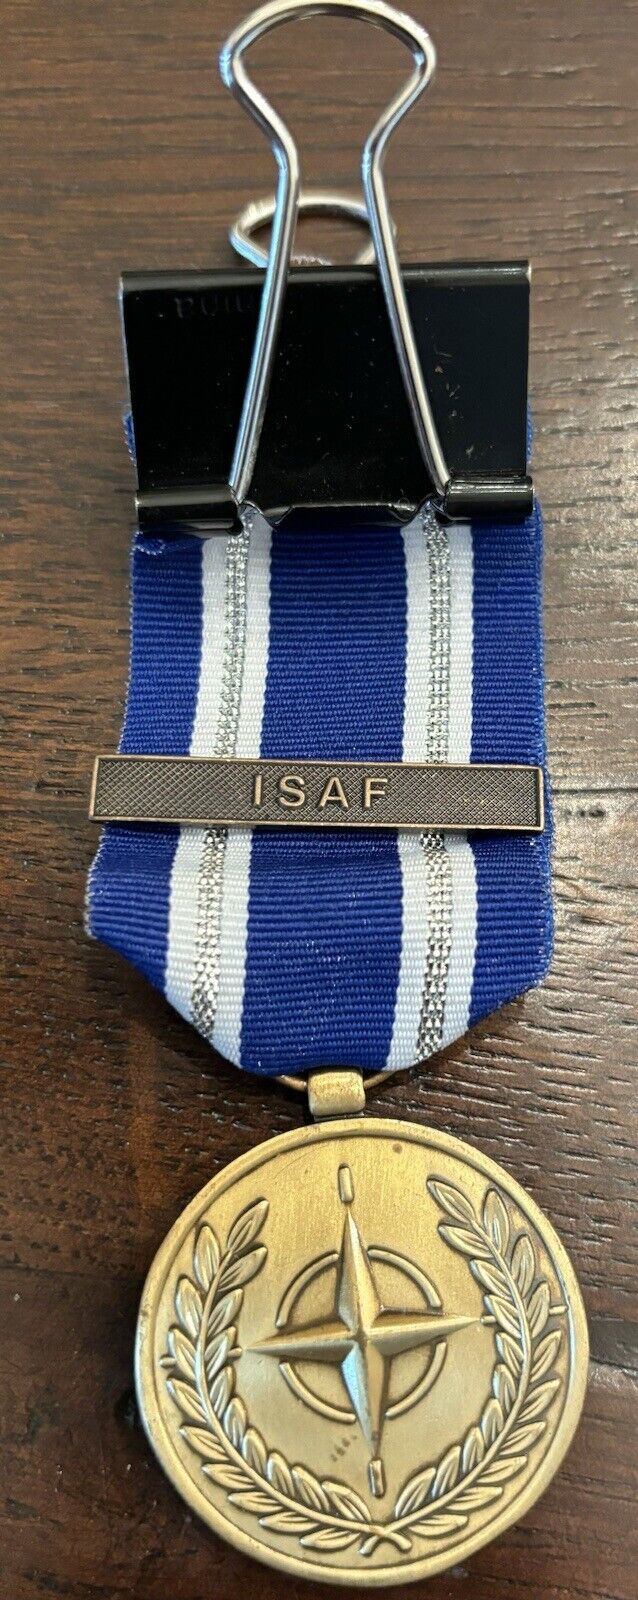 Afghanistan US Army In-Country Temporary Presentation Medal - NATO with ISAF Bar